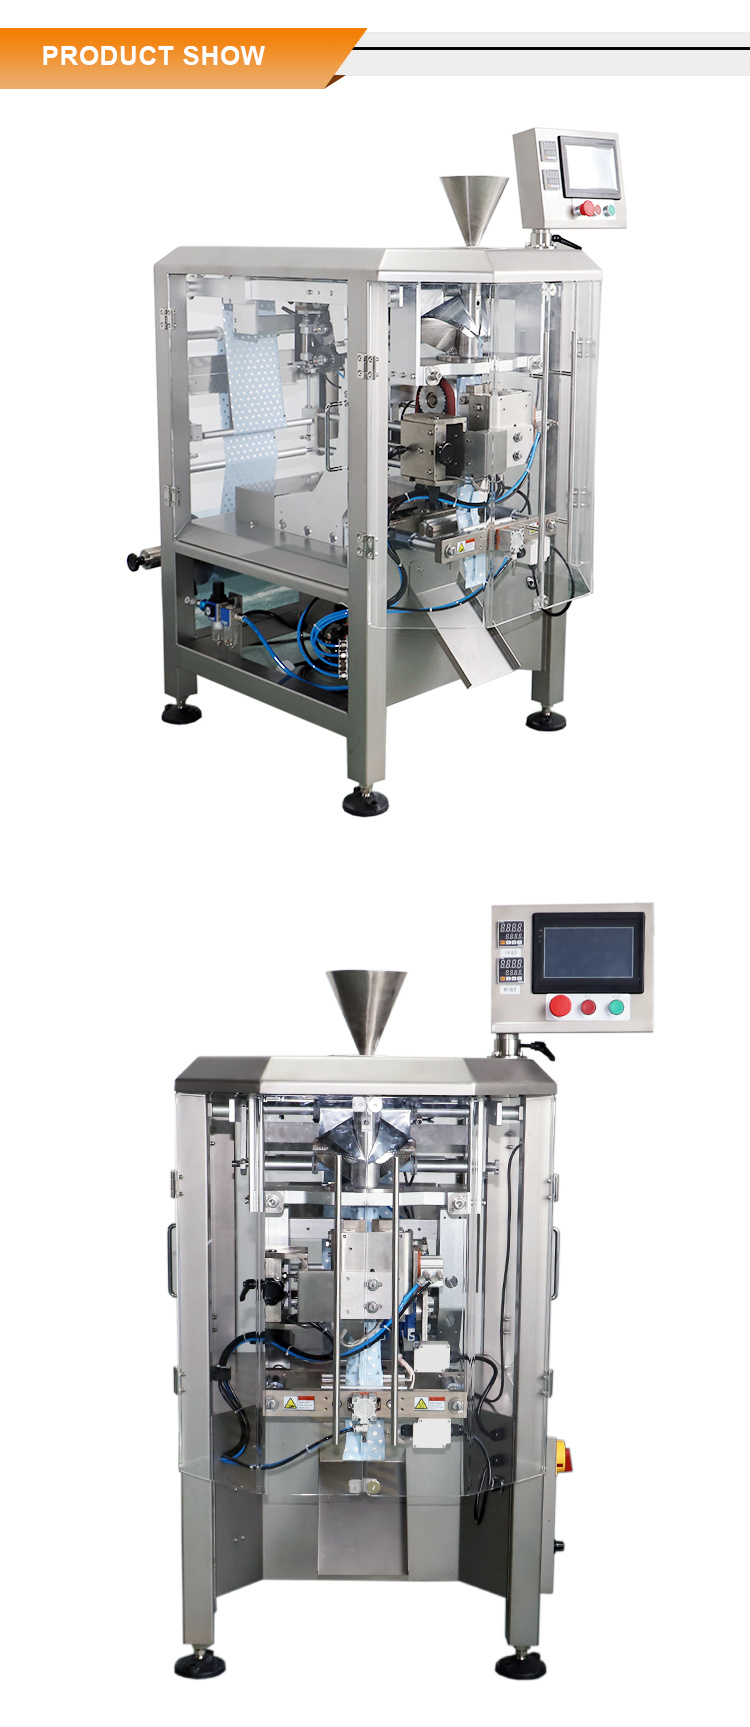 Automatic Vertical Small Dried Fruits Multihead Weigher Packing Machine, Packaging Machines for Dried Fruits